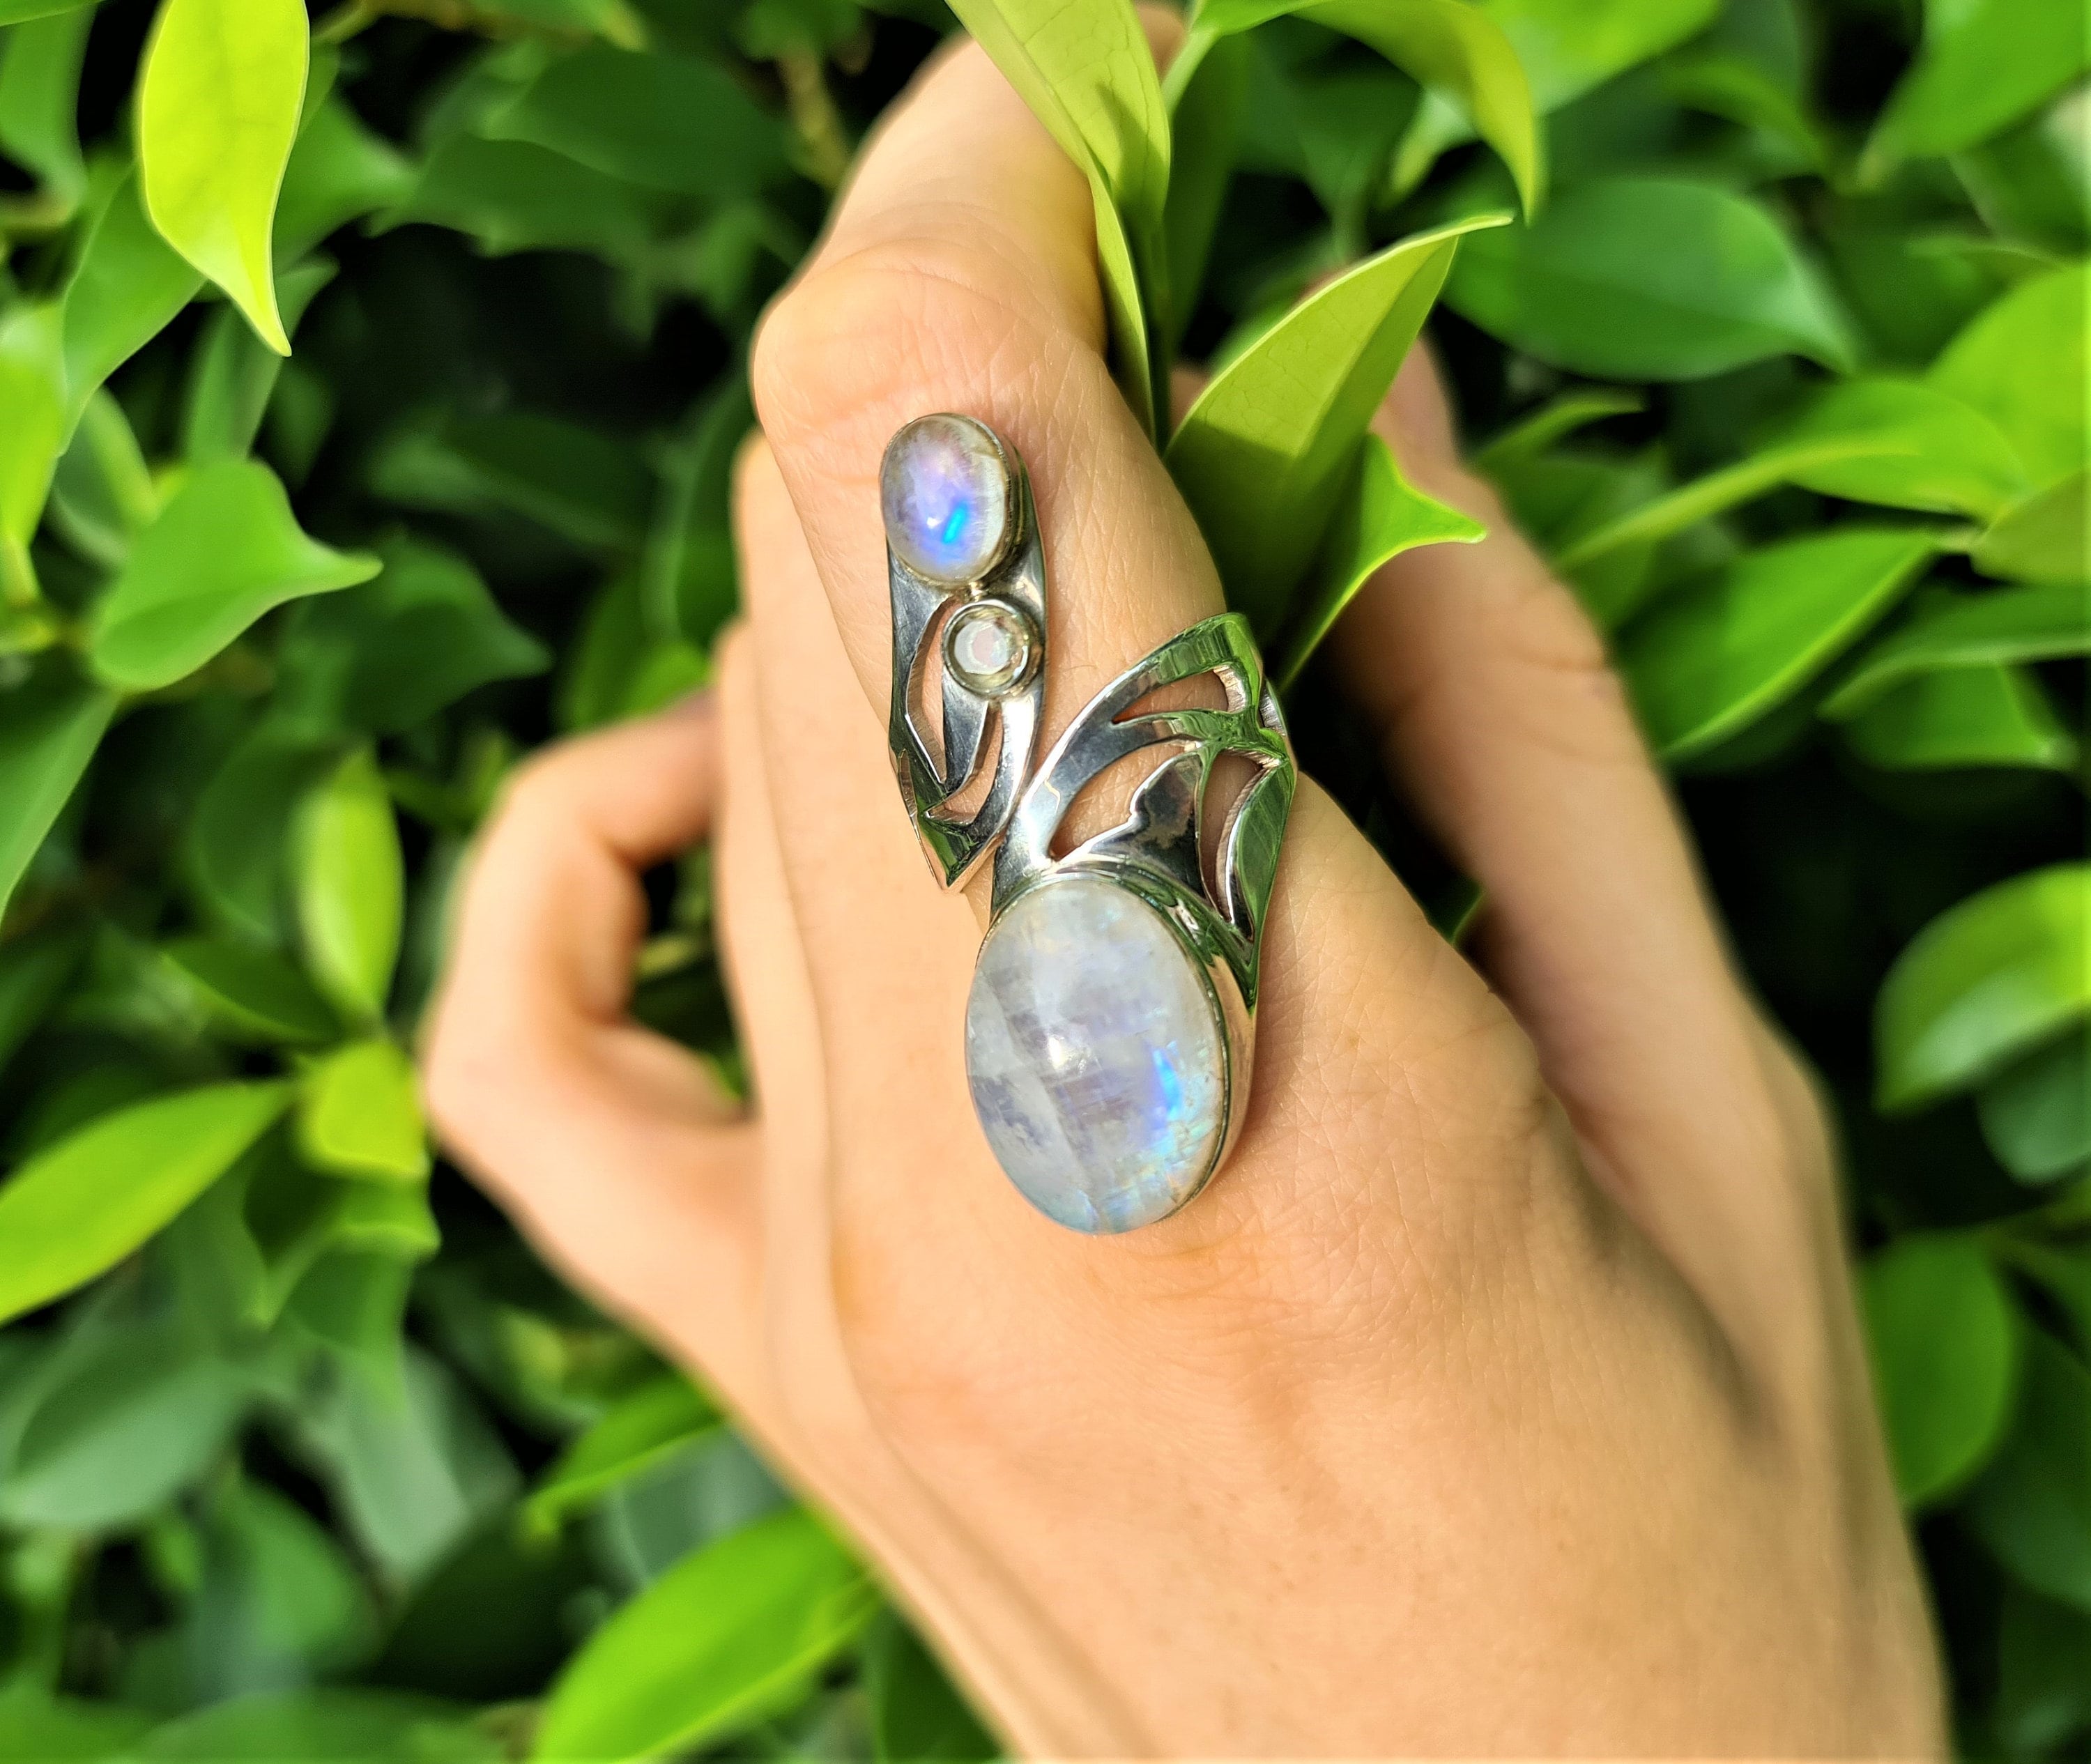 Buy Moonstone Ring / June Birthstone / Moonstone Jewelry / Birthstone Ring  / June Birthday Gift / Holiday Gifts for Her / Handmade Ring / Gifts Online  in India - Etsy